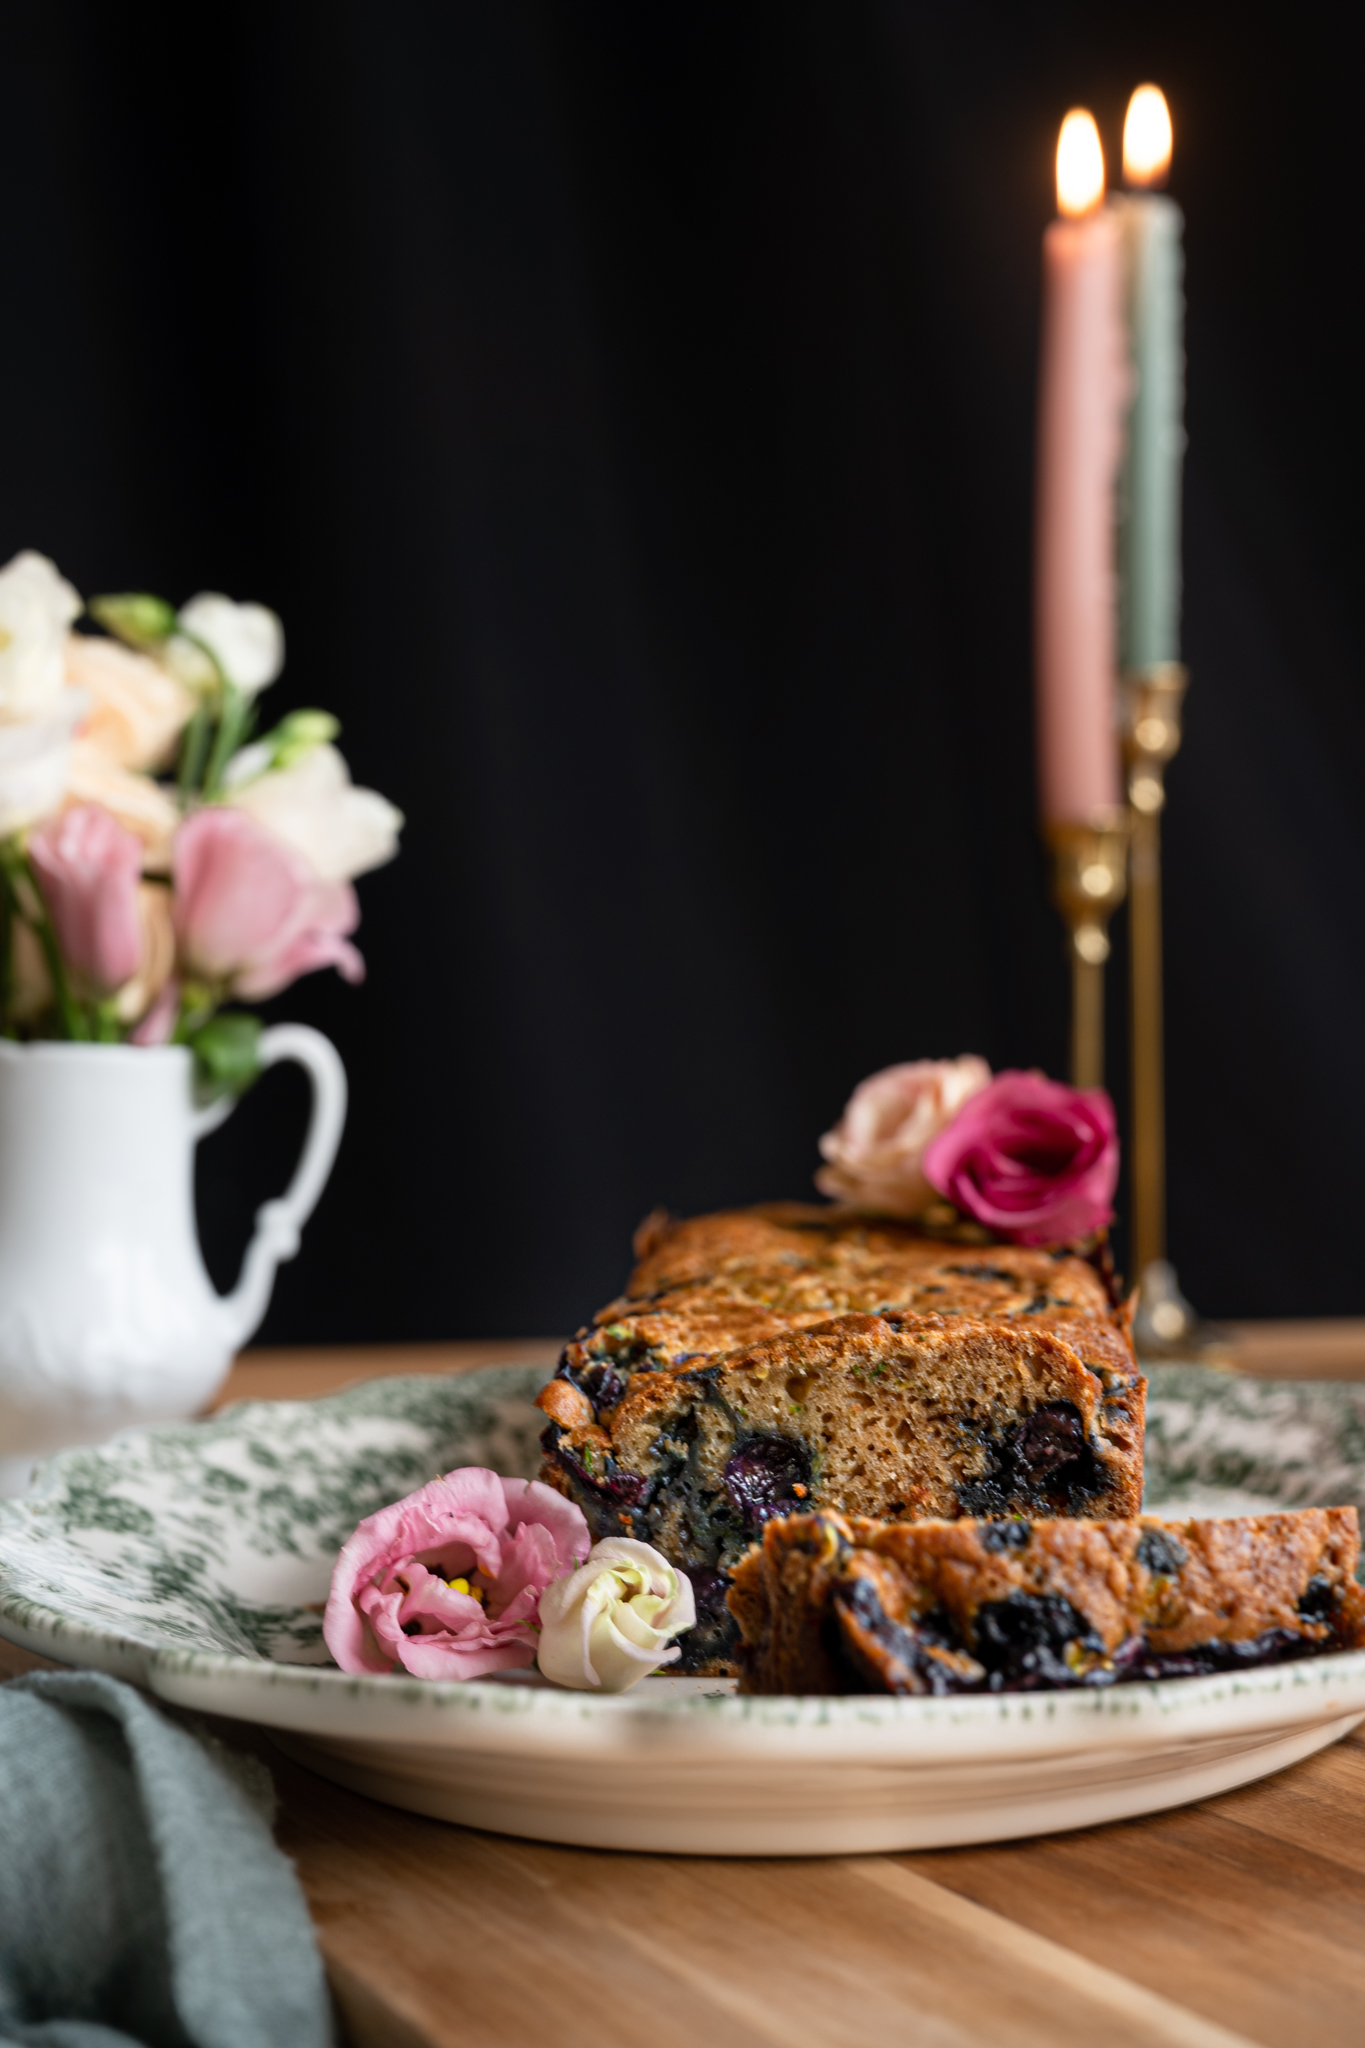 image of close up zucchini bread sliced into exposing blueberries in rustic still life scene with candles and flowers in the background